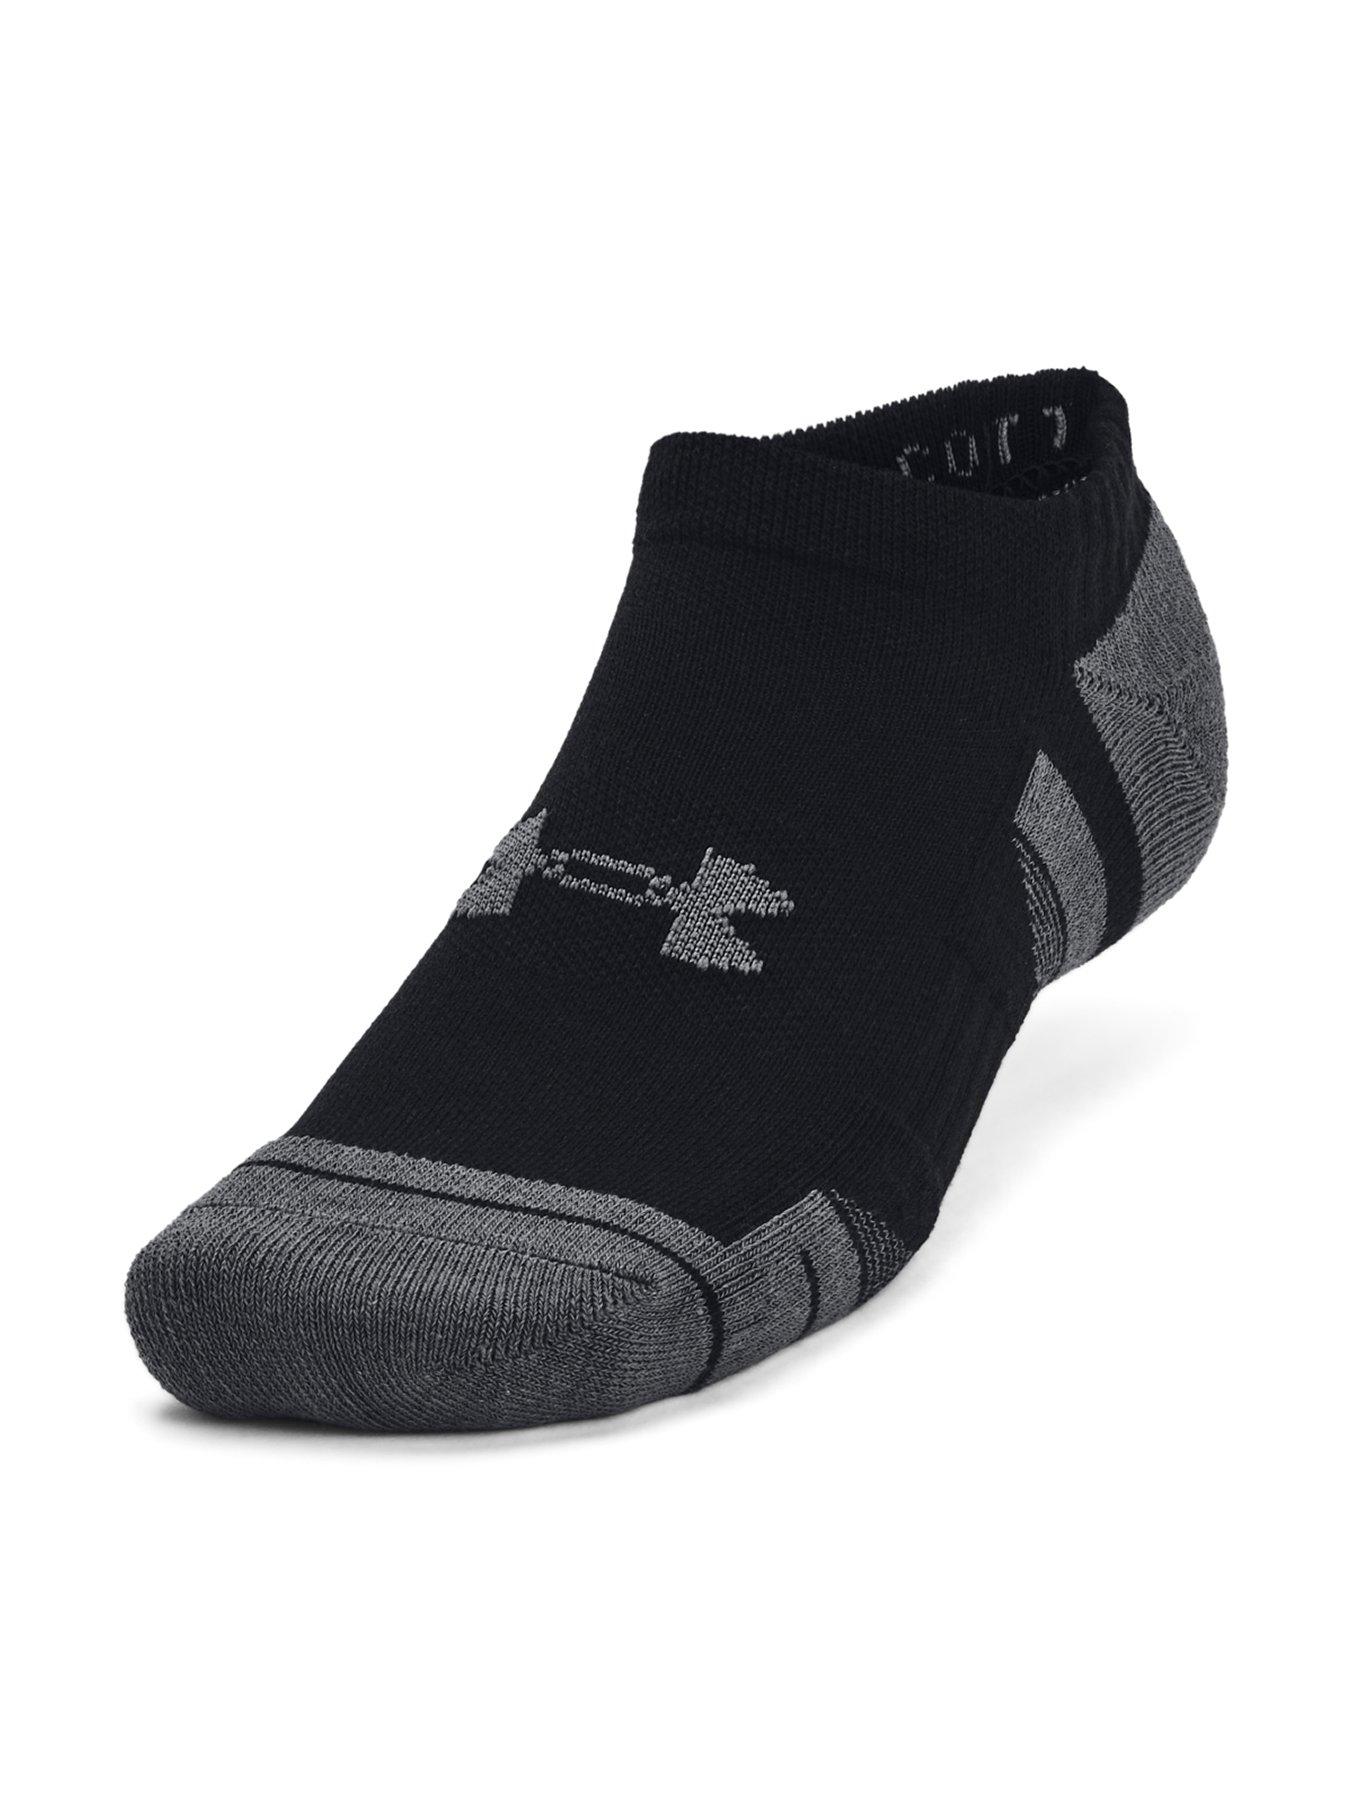 Under Armour Essential Comfort No Show Socks 3 Pairs Size M for sale online